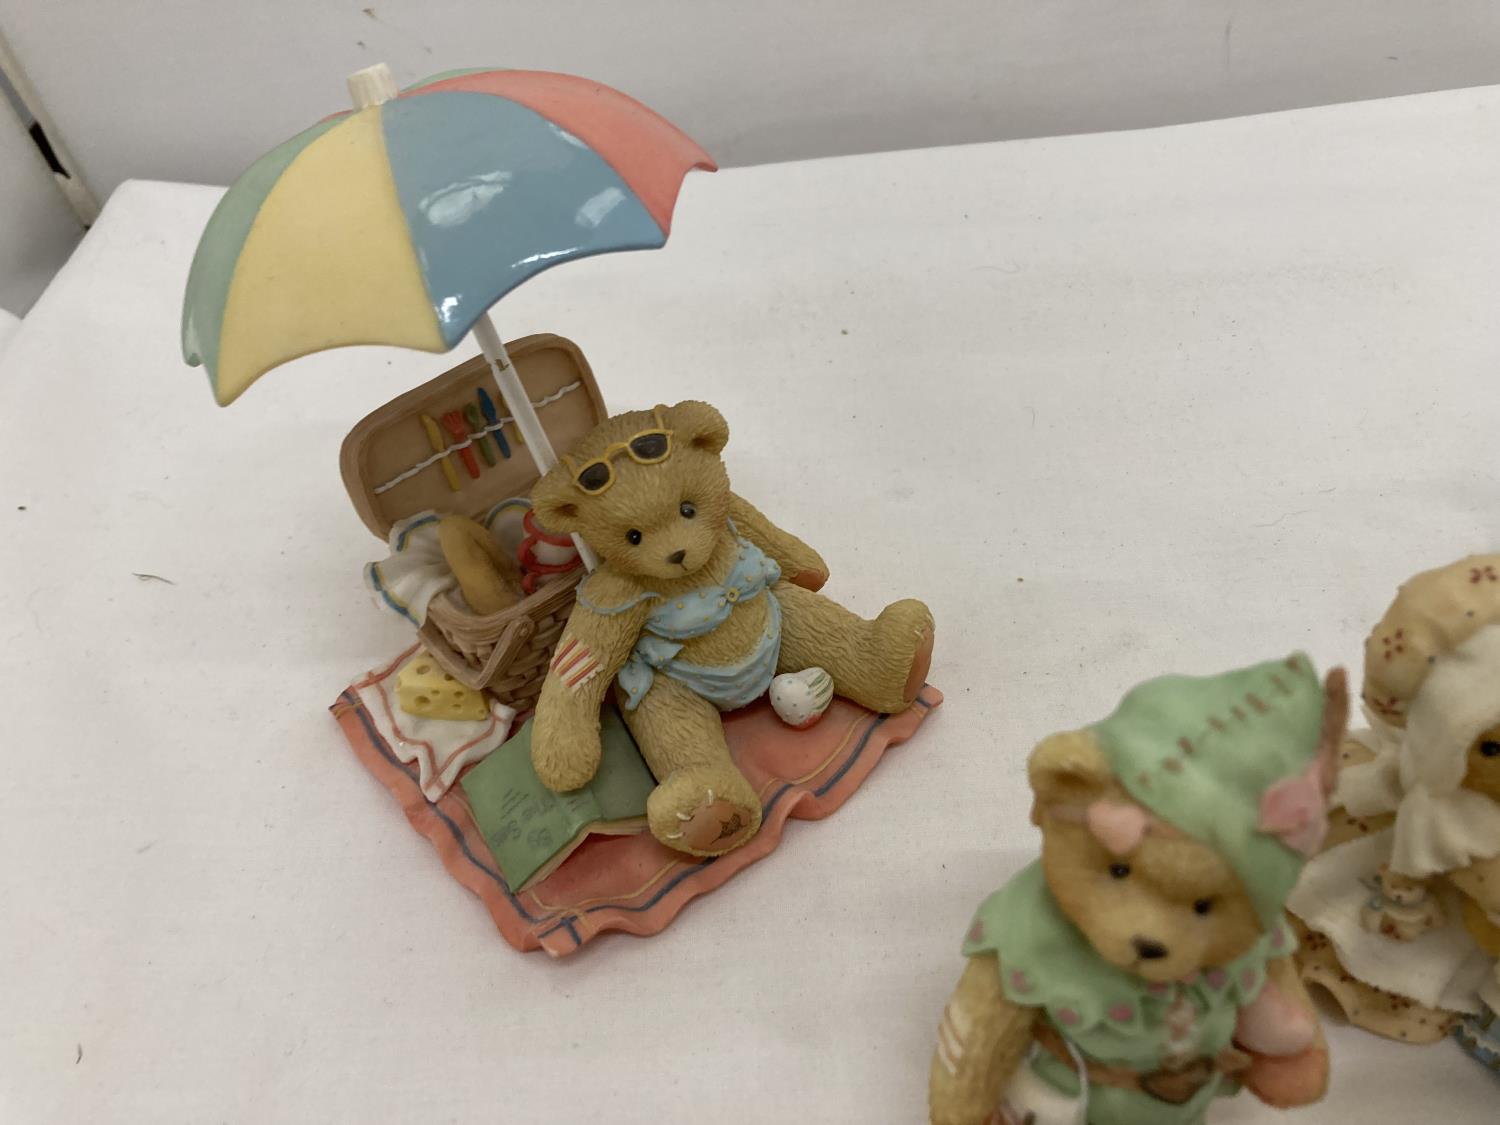 FOUR LIMITED EDITION CHERISHED TEDDIES, 'CHRISTINA', 'ROBIN', 'HALEY AND LOGAN', AND 'JUDY' - Image 9 of 12